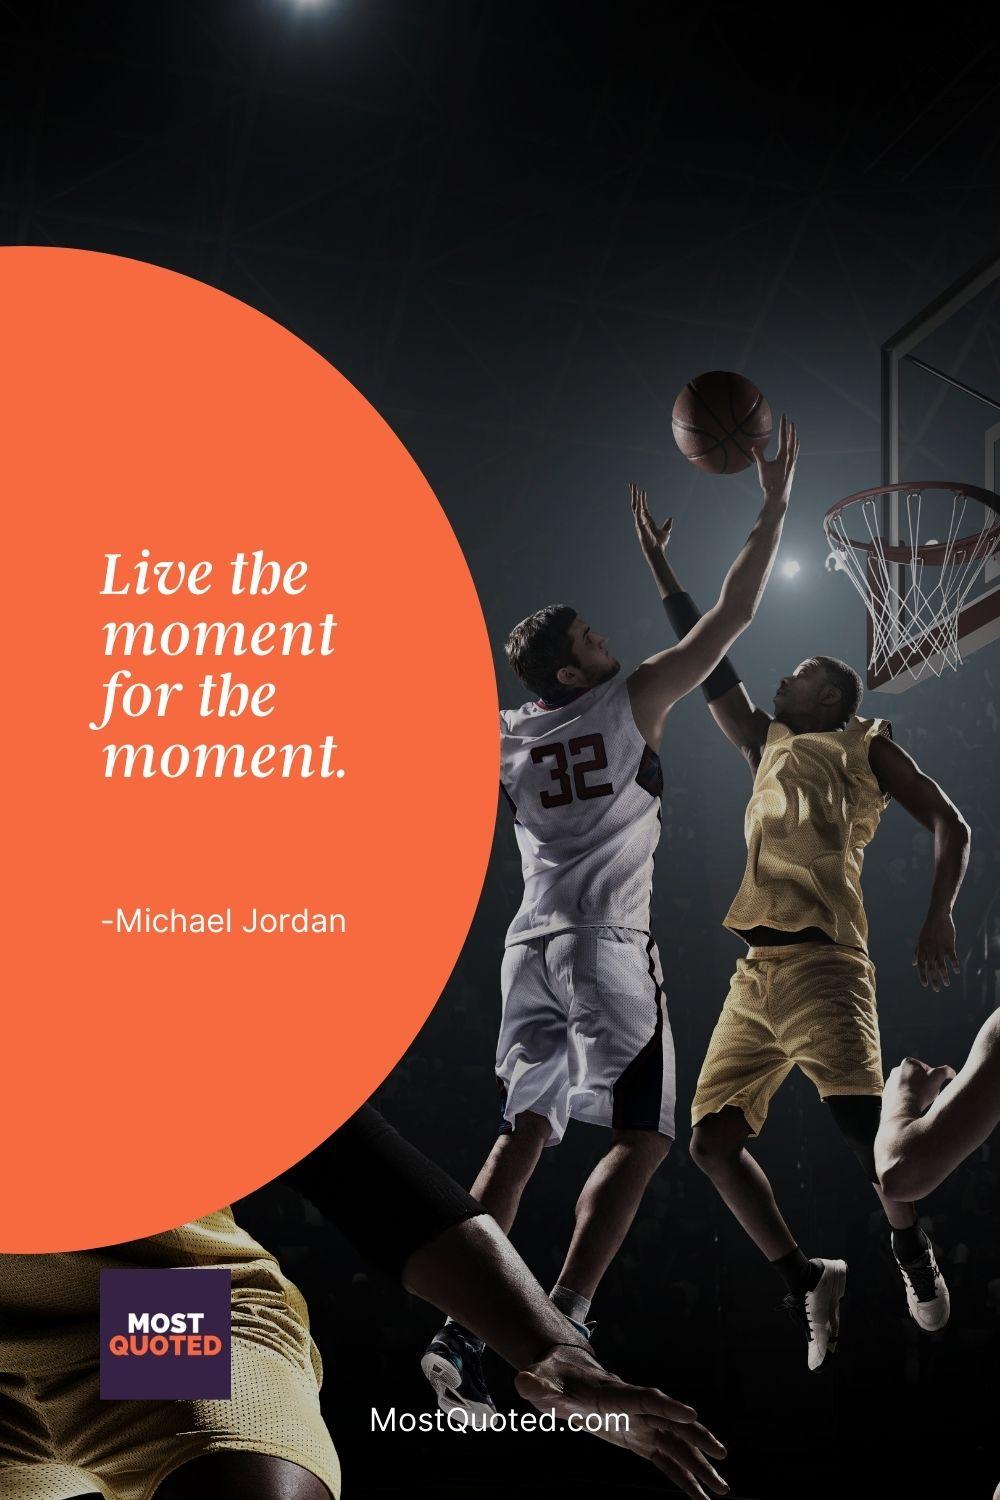 Live the moment for the moment. - Michael Jordan